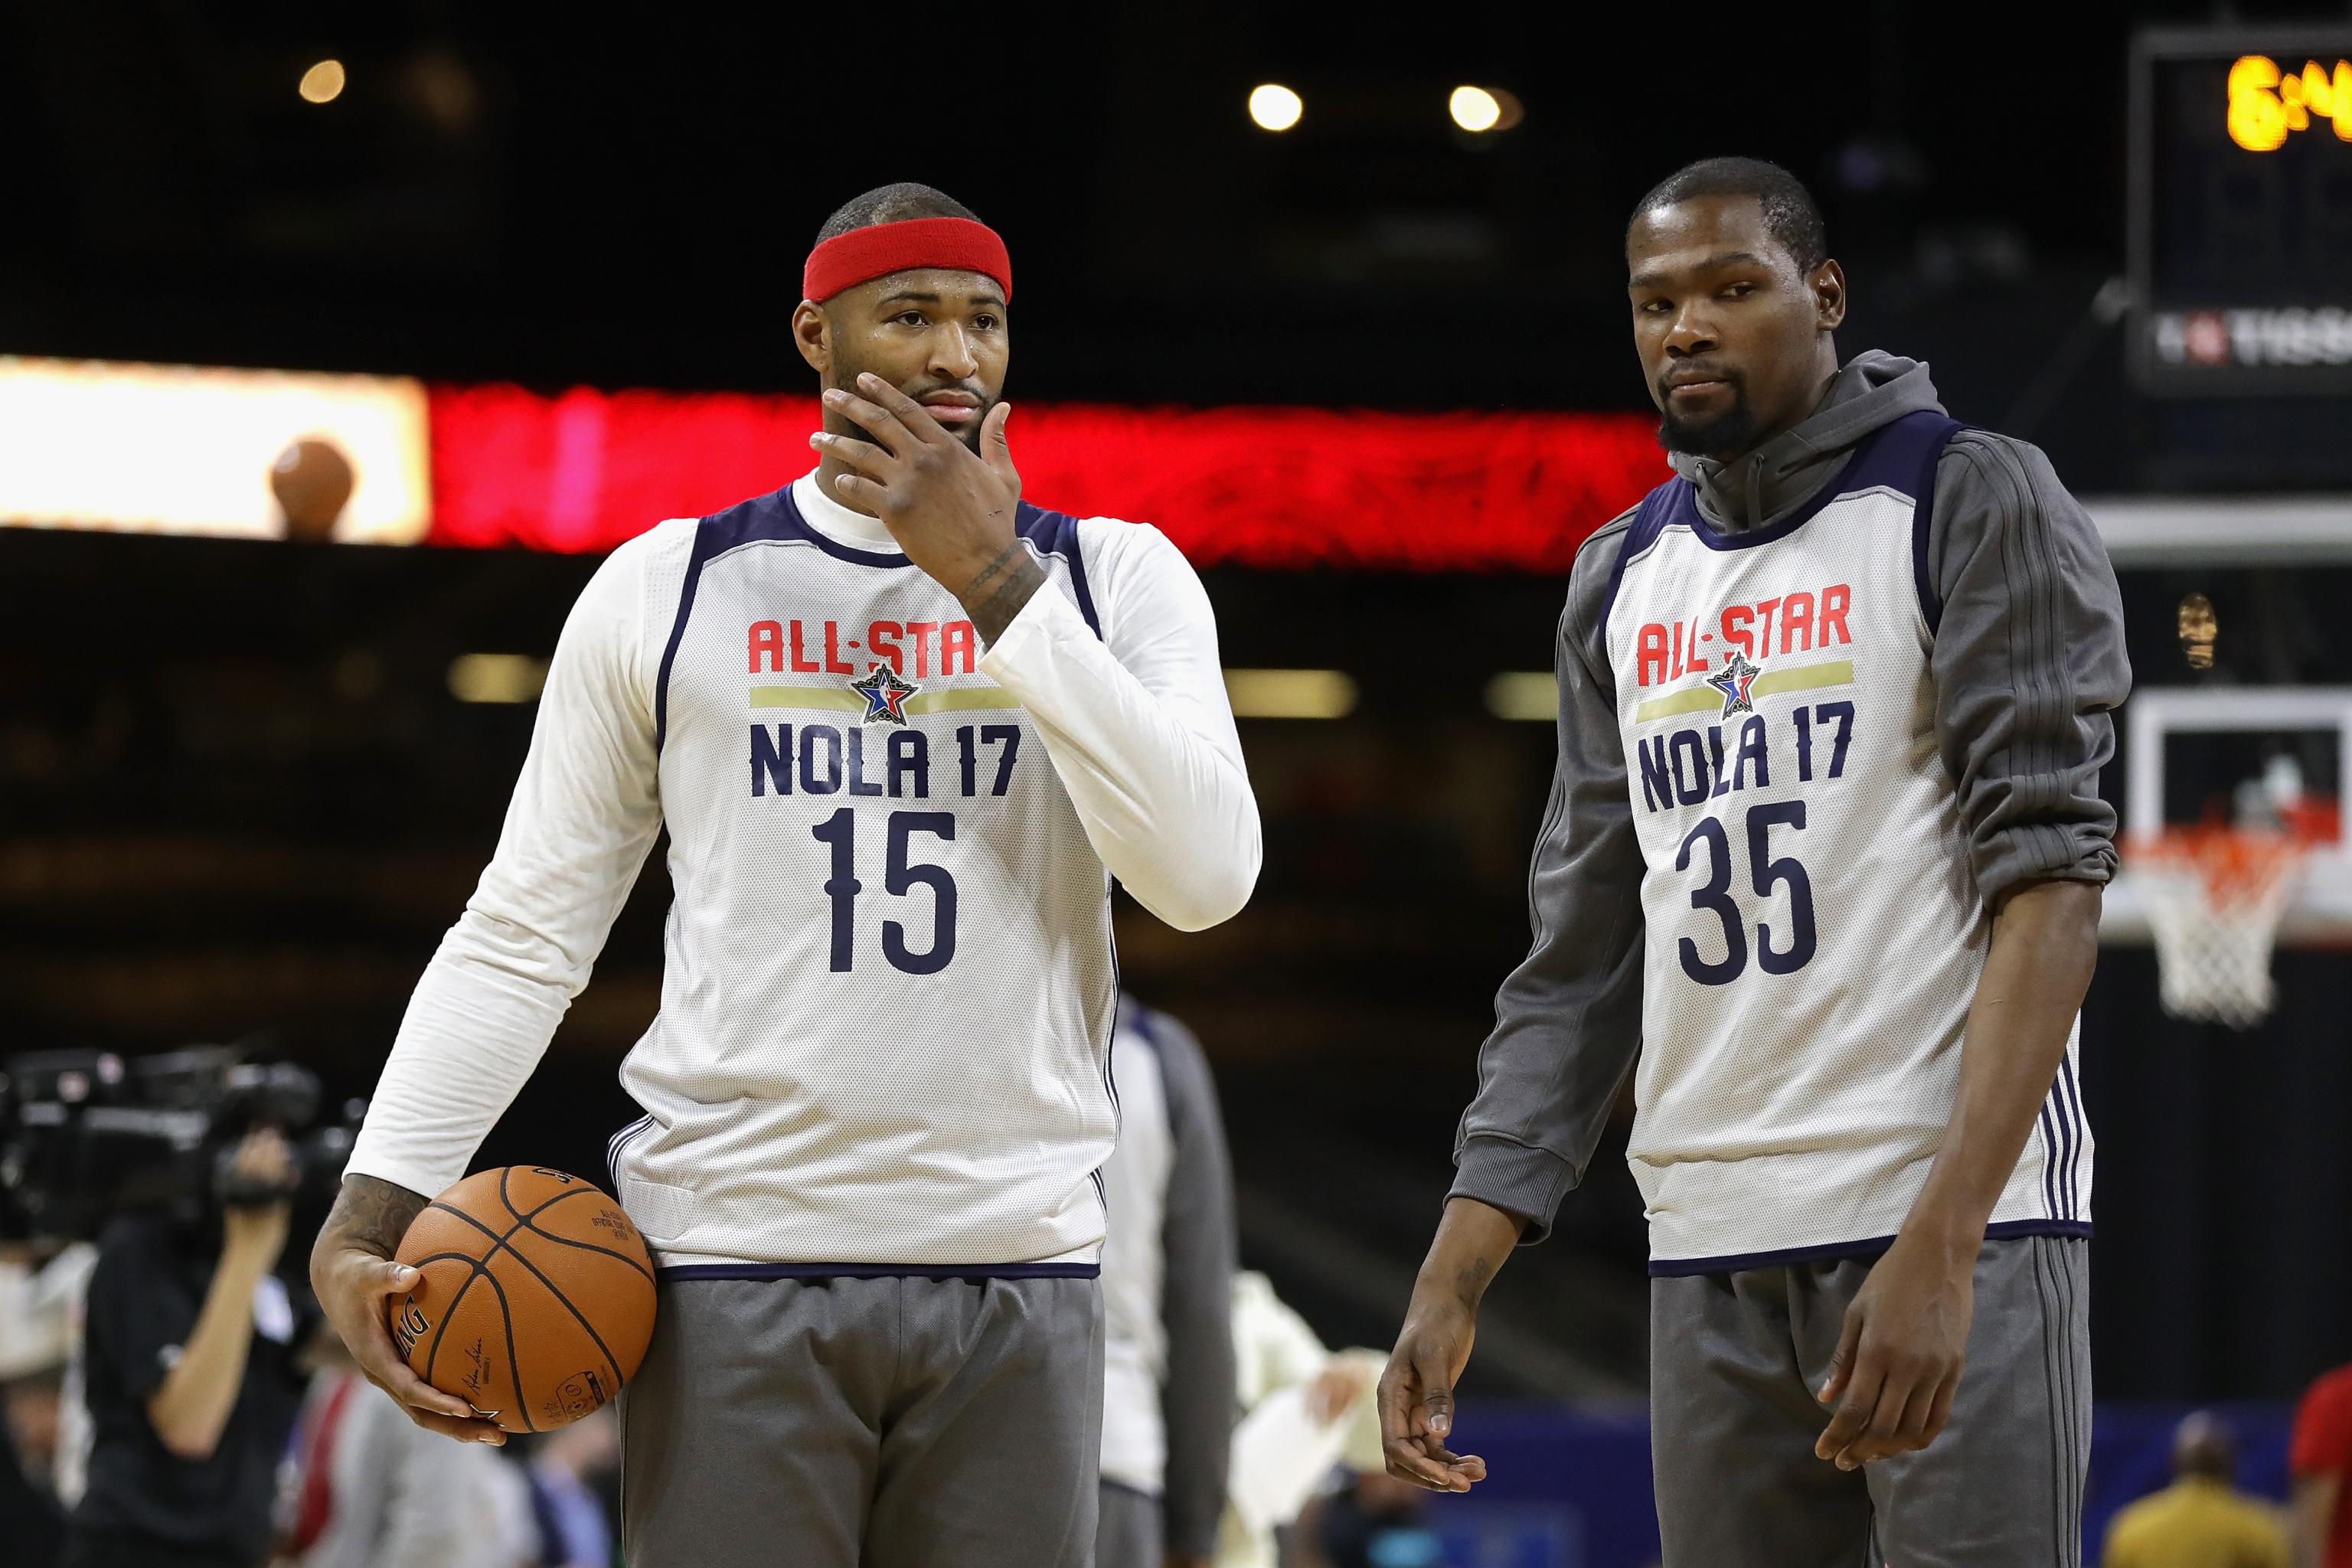 If you aren't rooting for DeMarcus Cousins, you should be